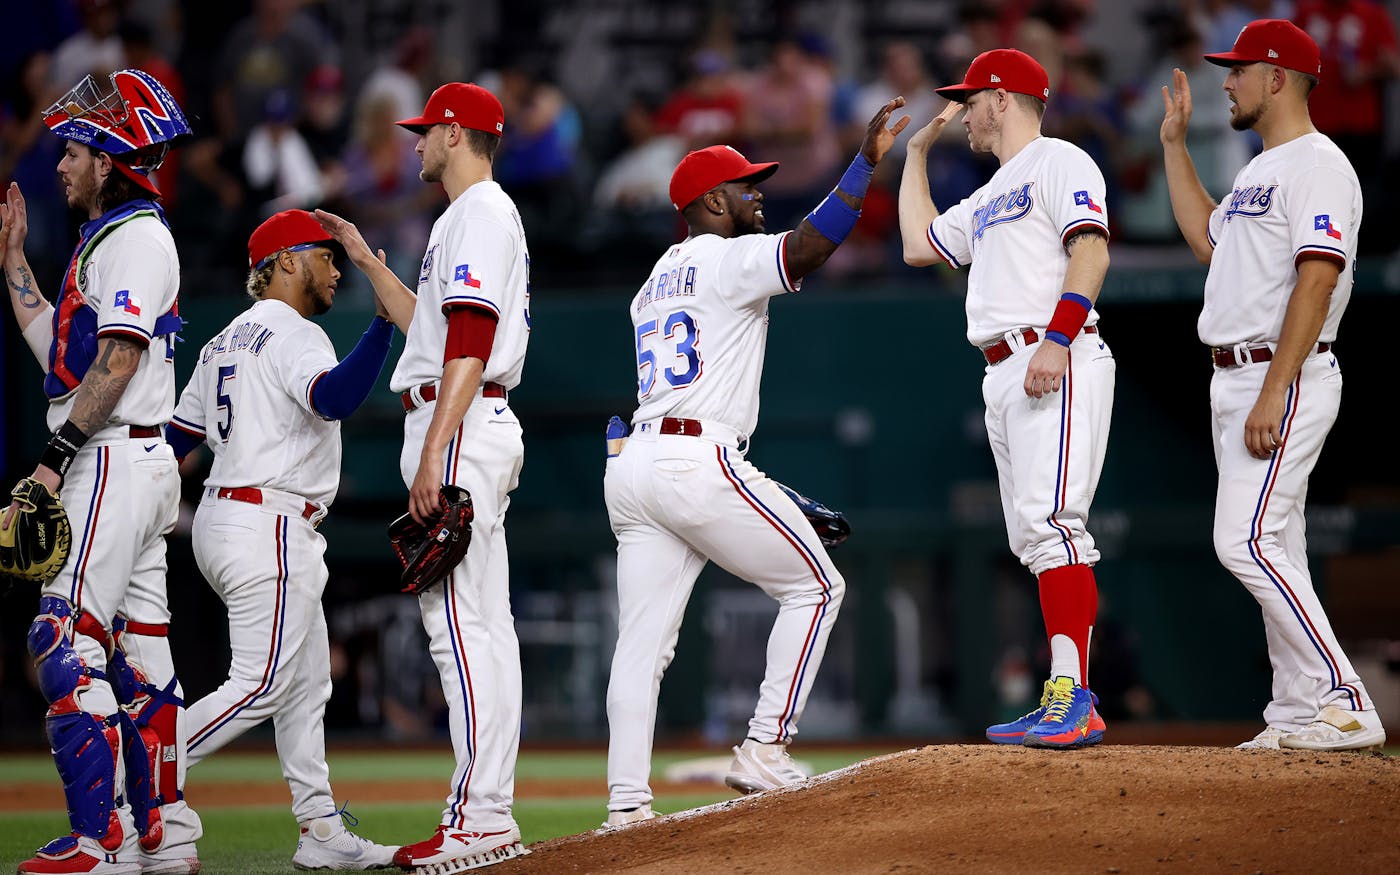 Sports Illustrated Texas Rangers News, Analysis and More